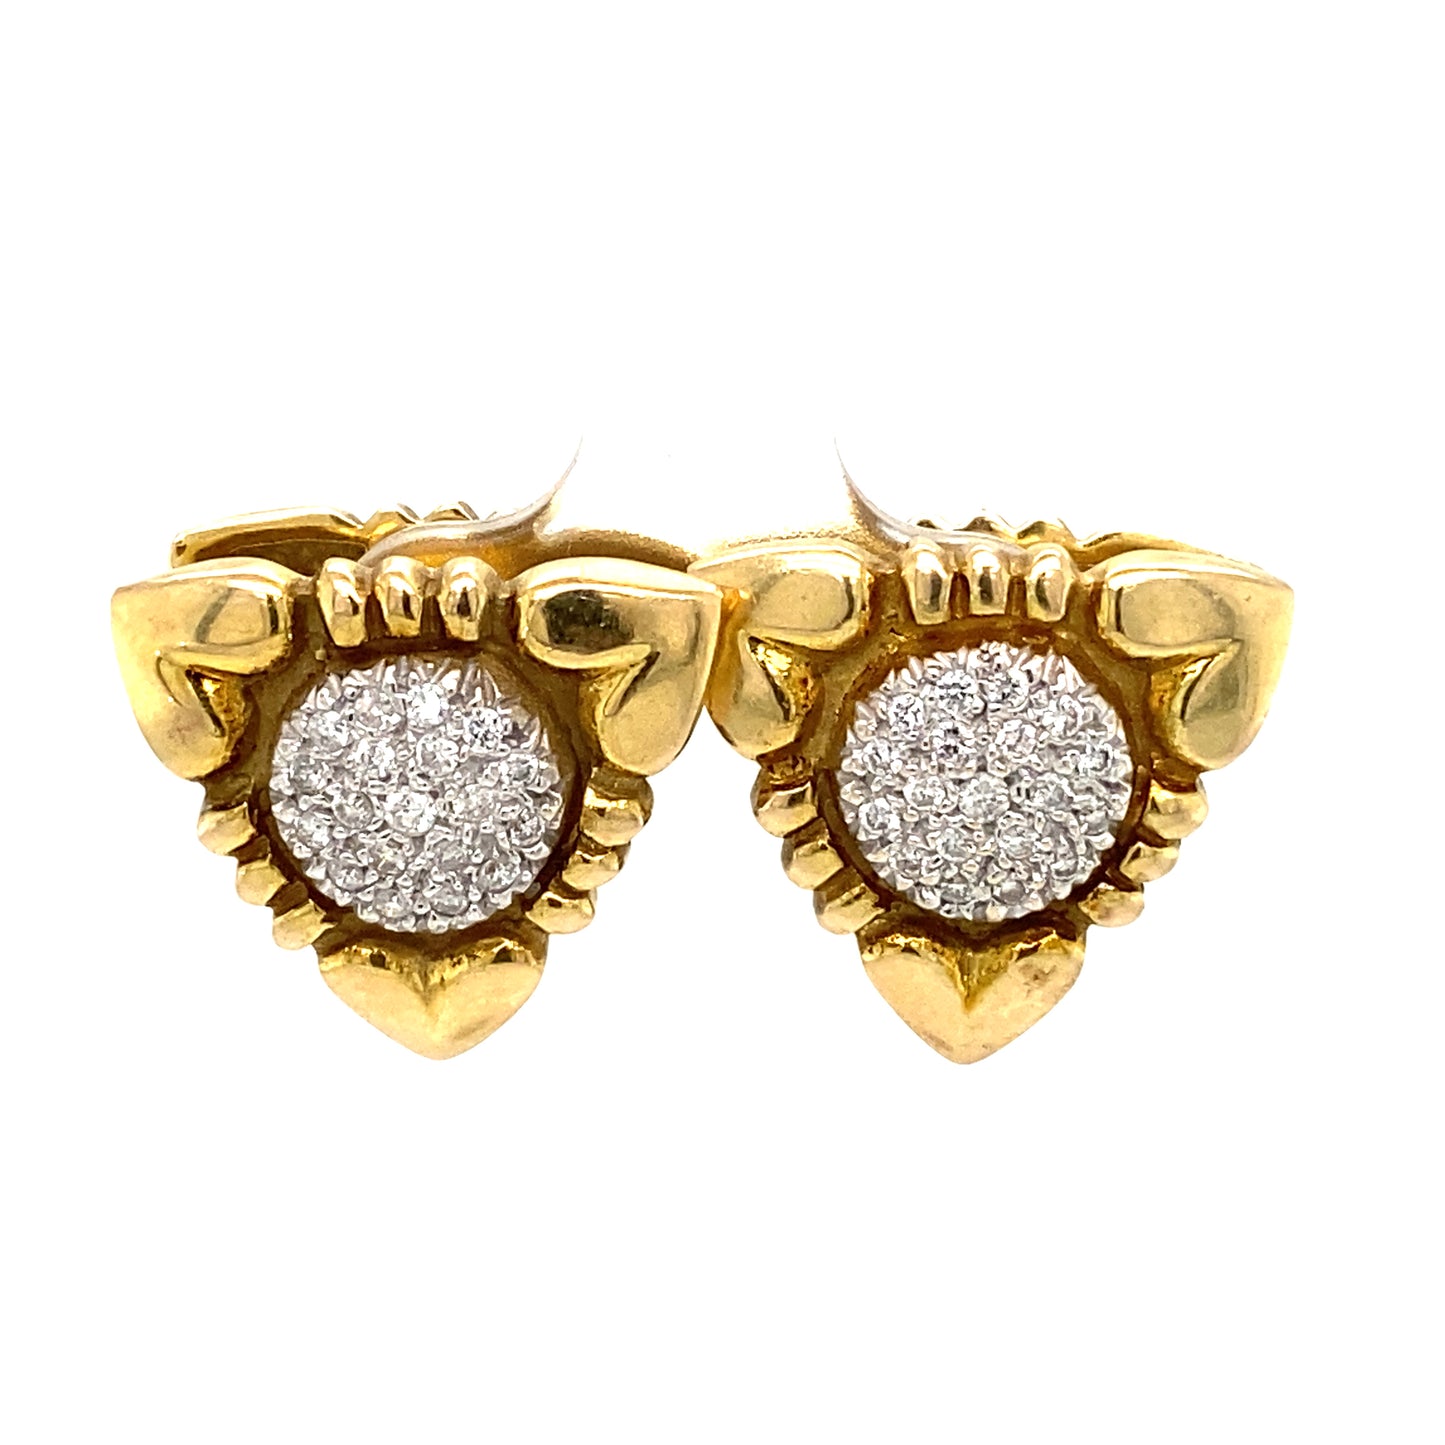 Circa 1950s Reversible Triangular Earrings with Diamonds in 14K Gold